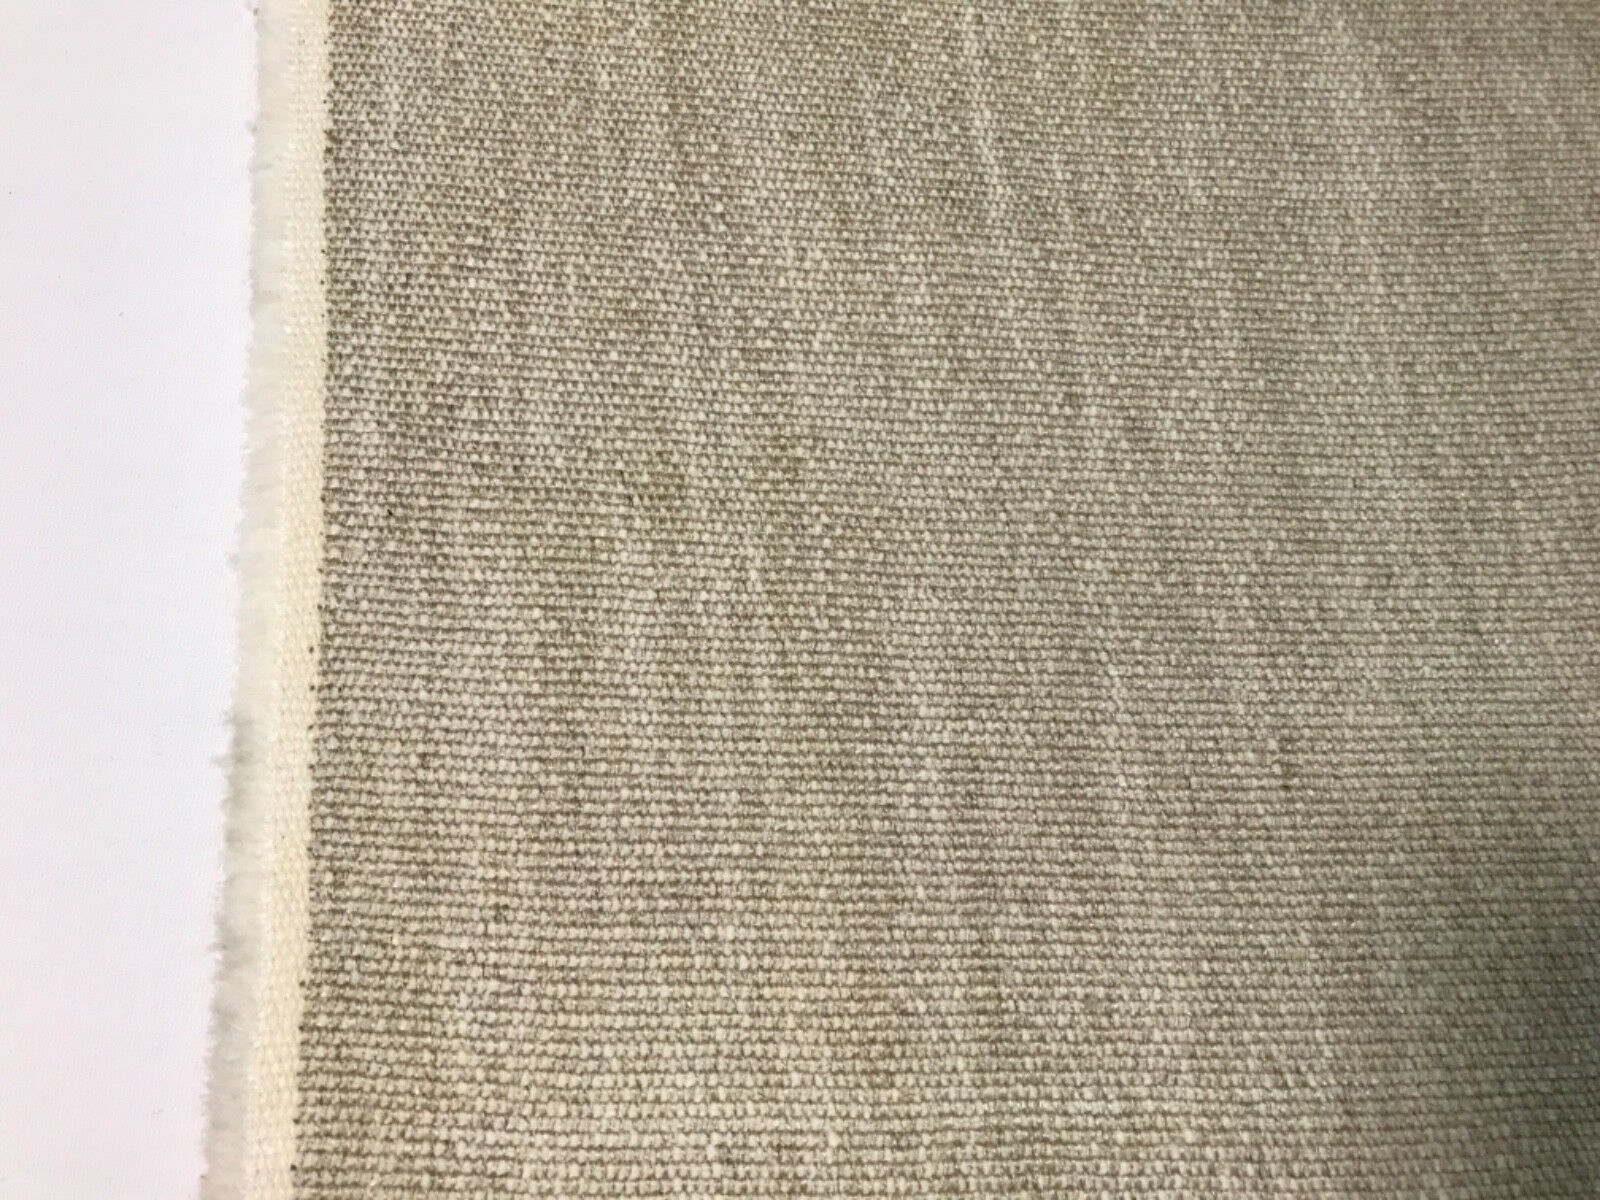 Marvic Textiles 5808-1 Egmont in Parchment Linen, Wool, Uph. Fabric, 8 1/2 yds.